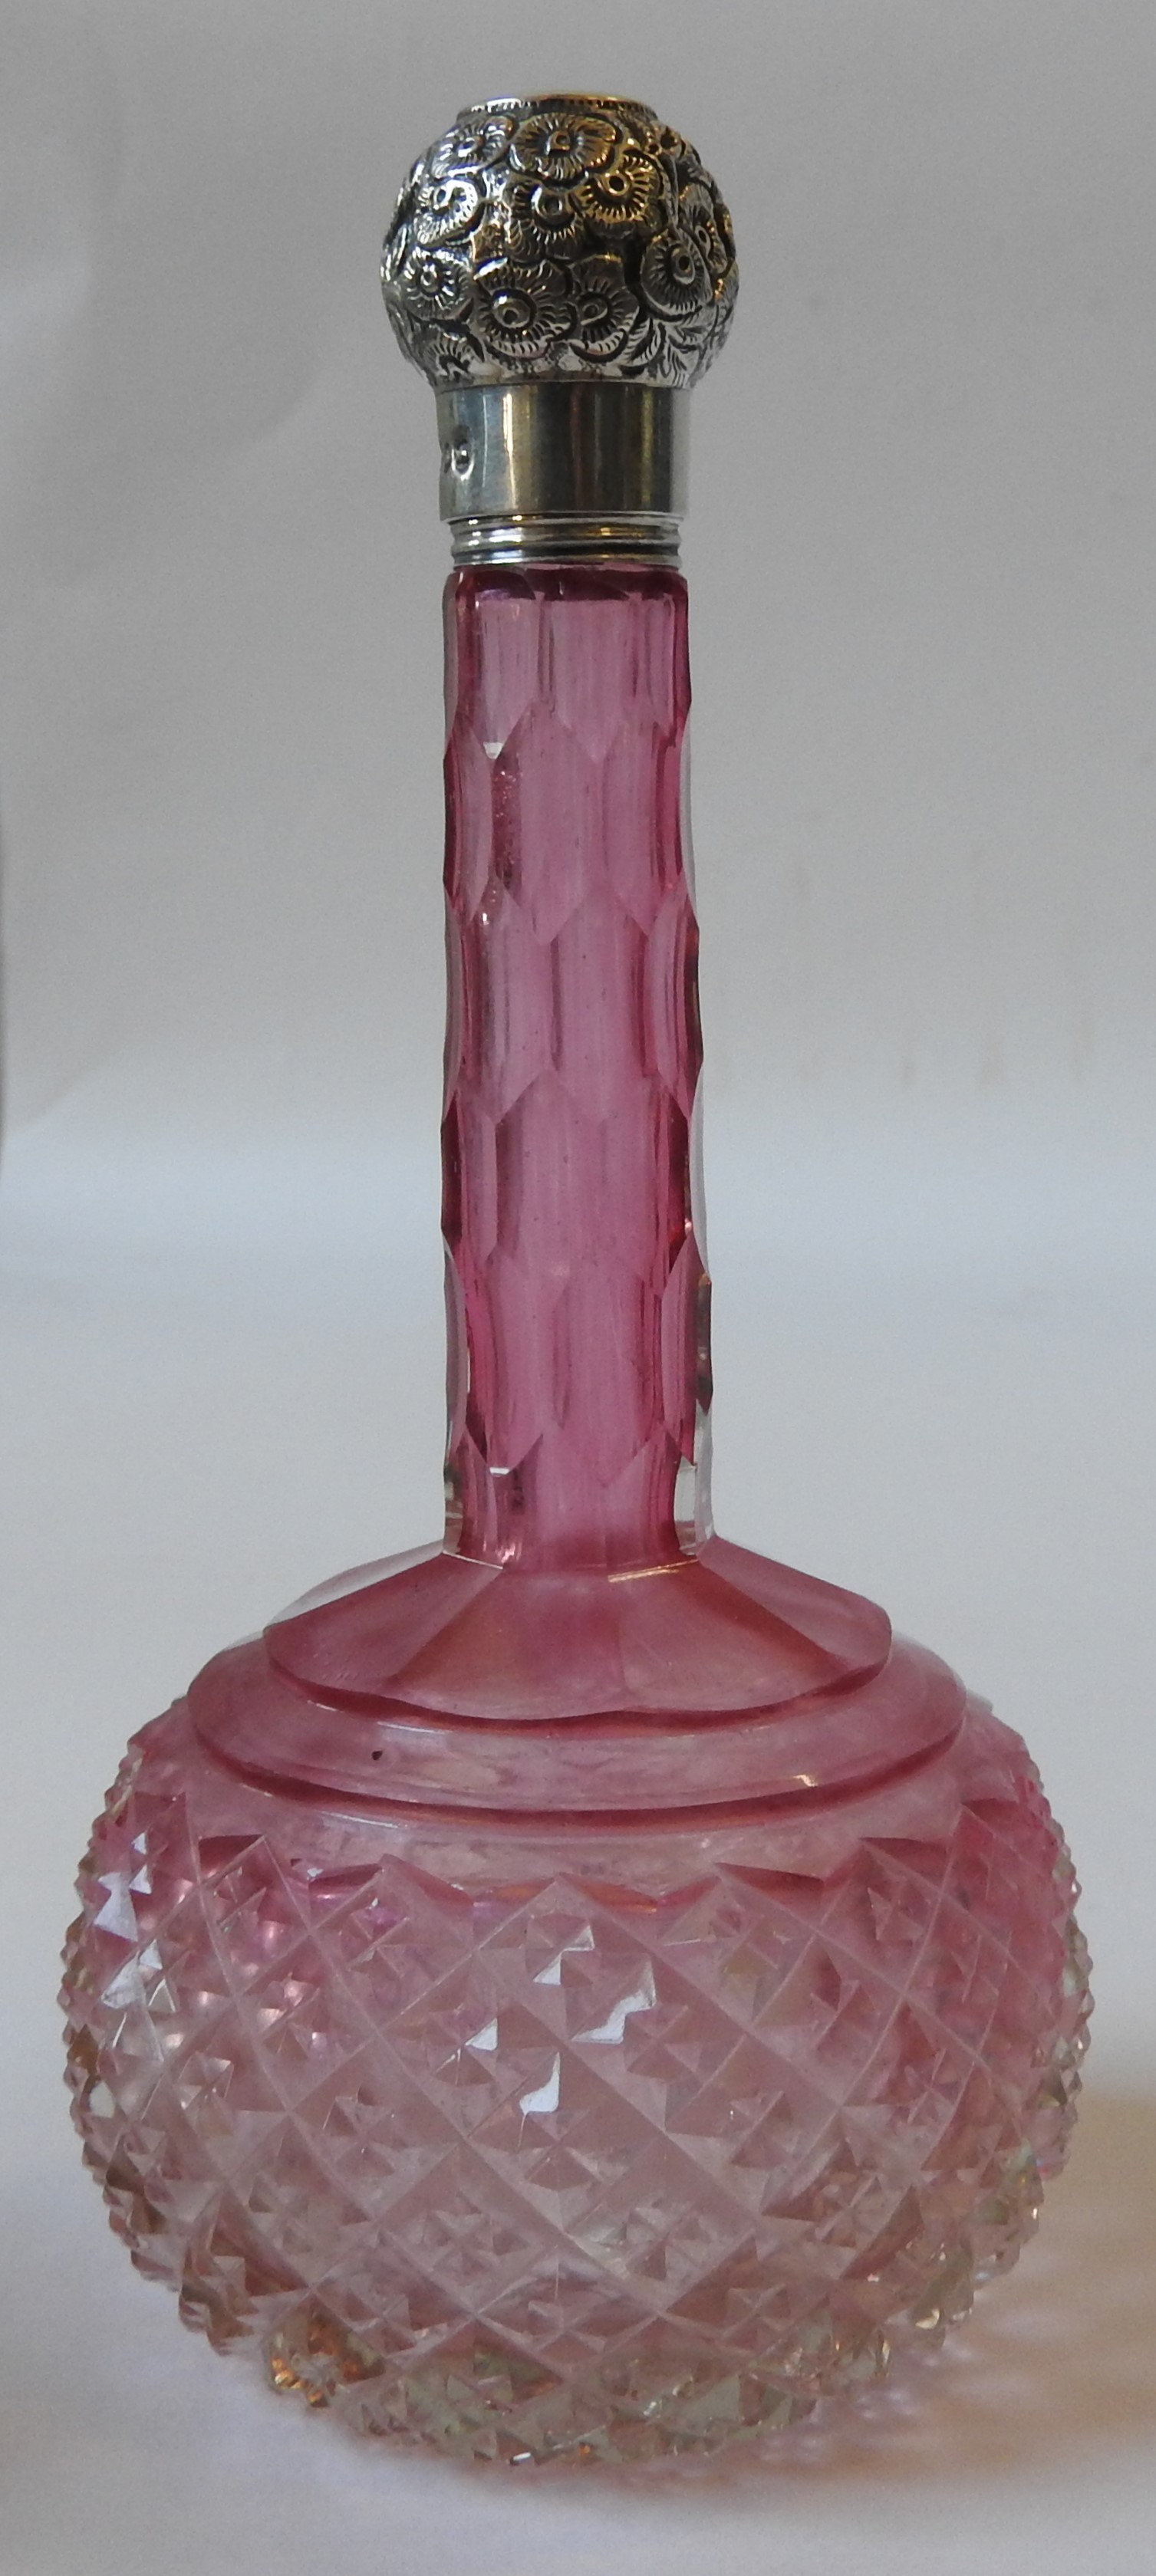 A 19TH CENTURY CRANBERRY GLASS BOTTLE, hobnail cut globular body with a slender faceted neck, with a